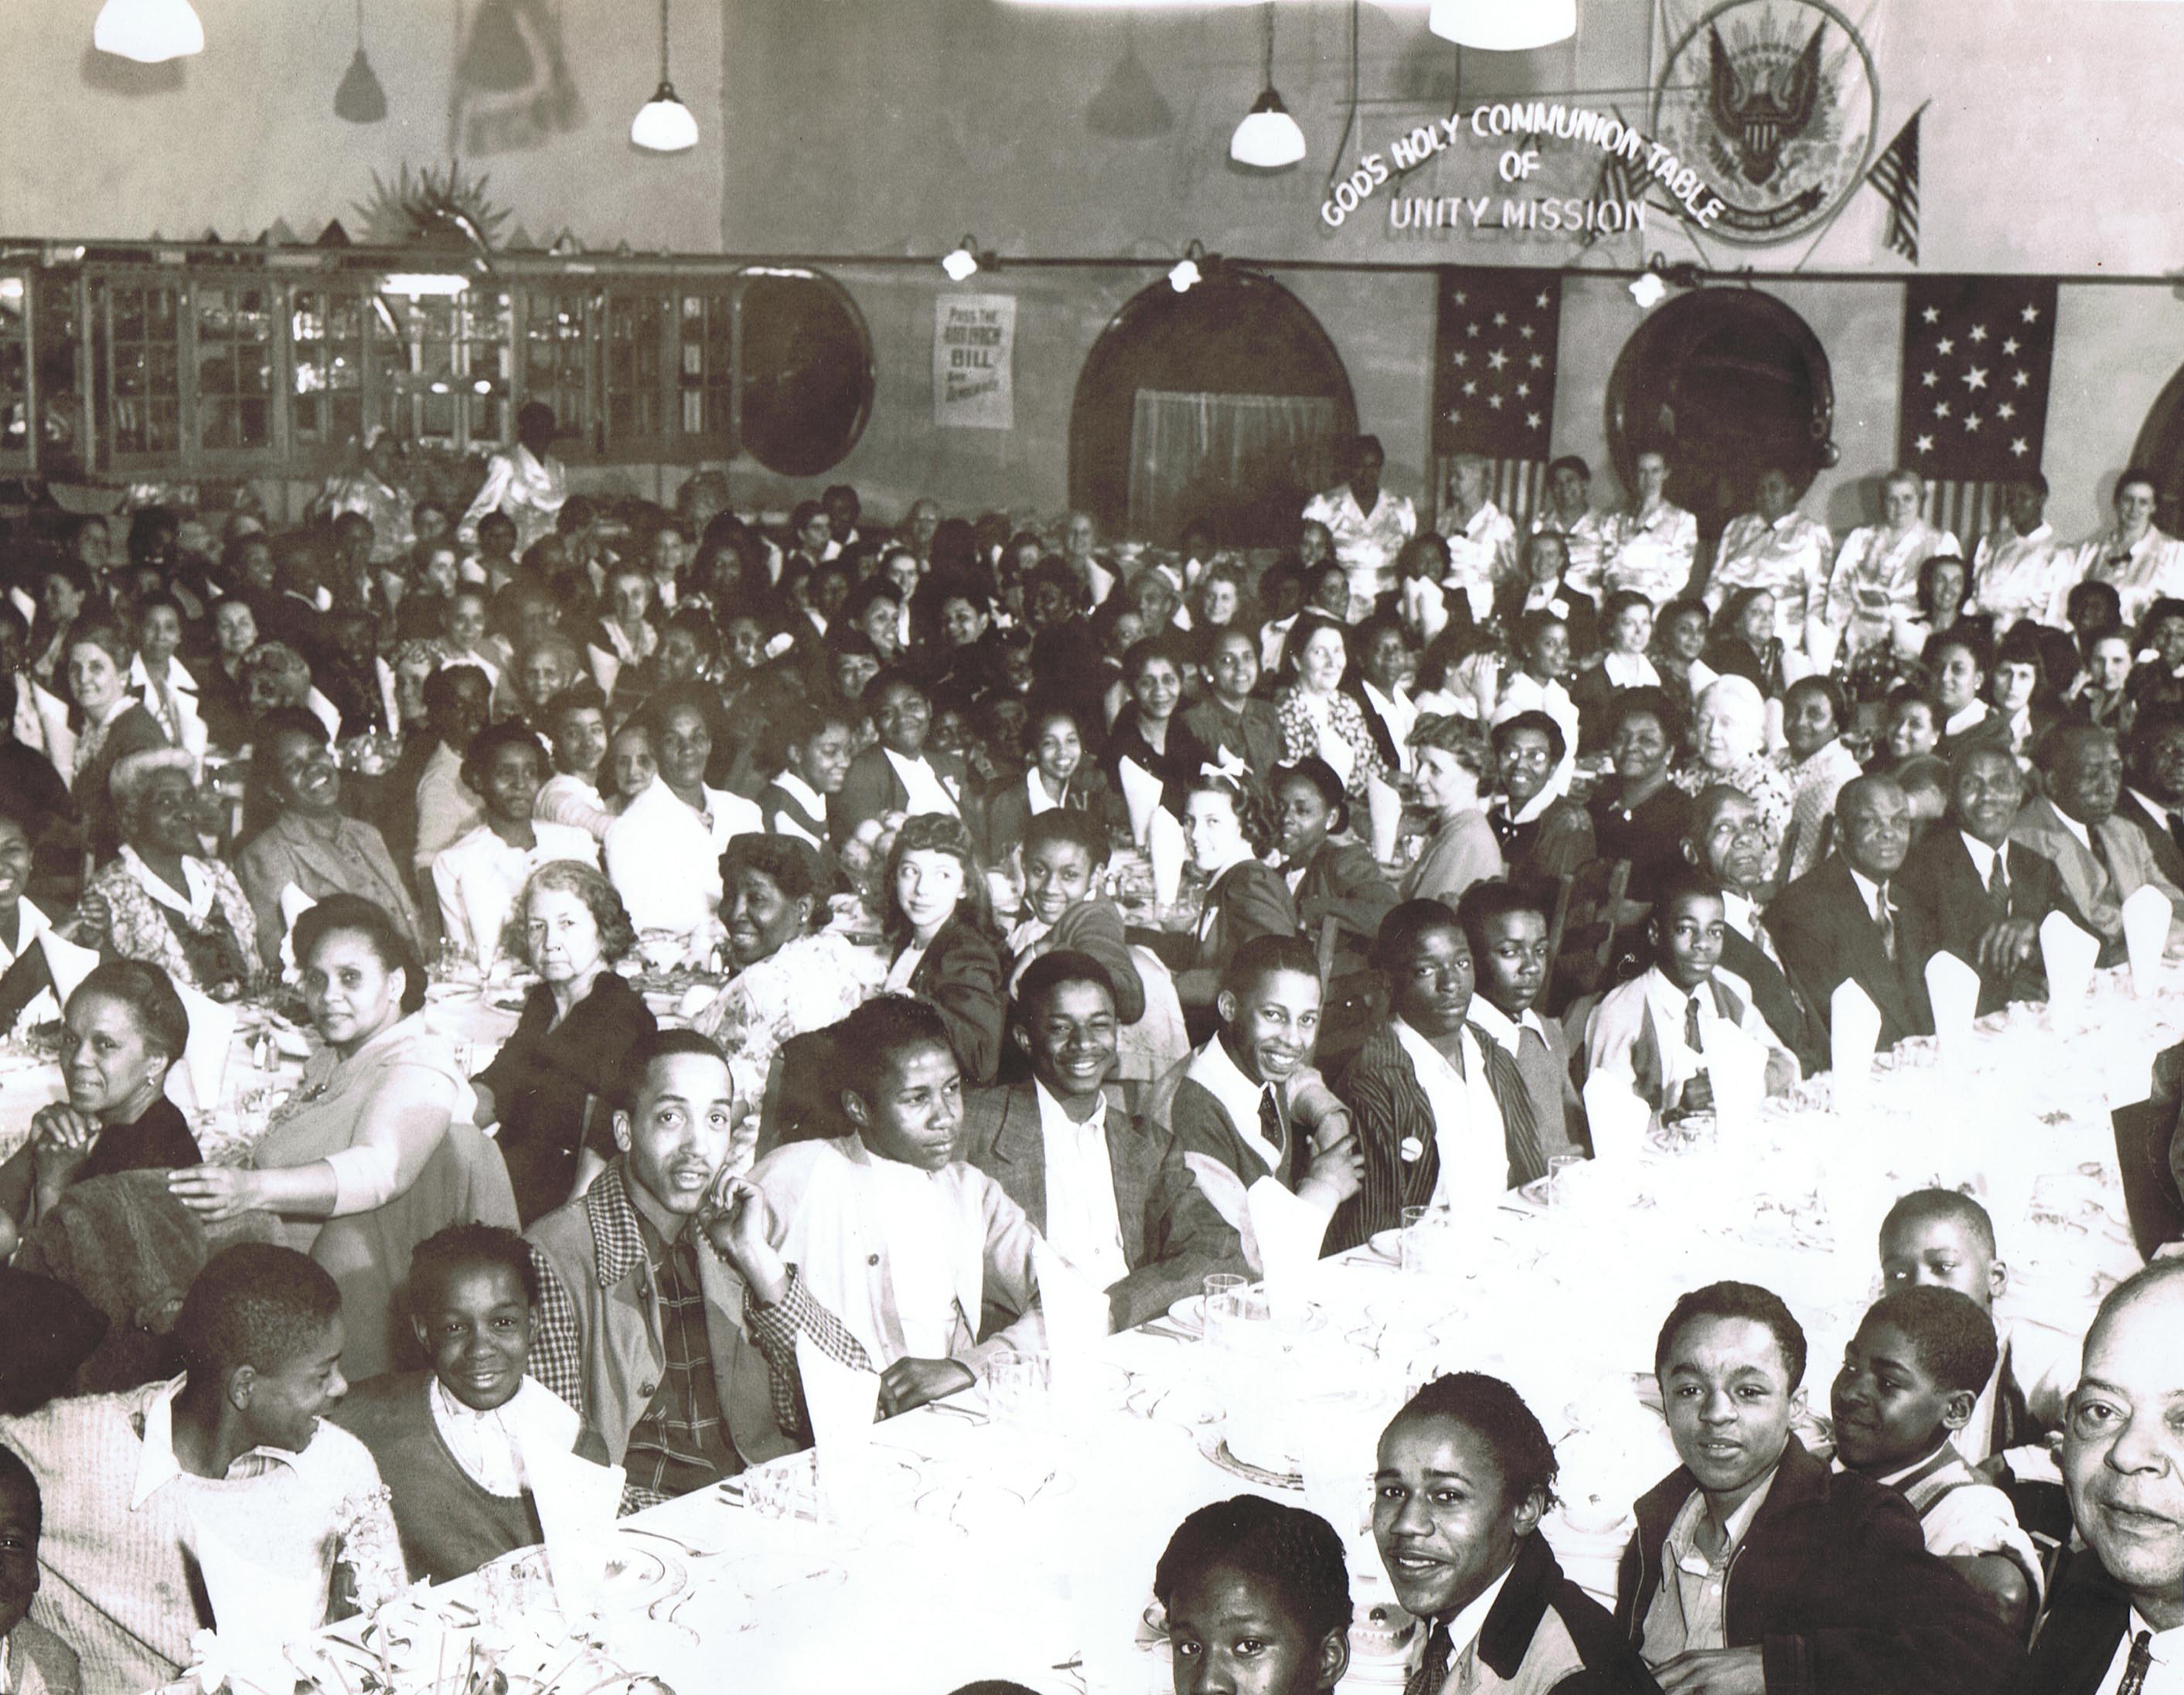 Neighborhood children being served at the Holy Communion Table of the Unity Mission Church,Philadelphia, PA.